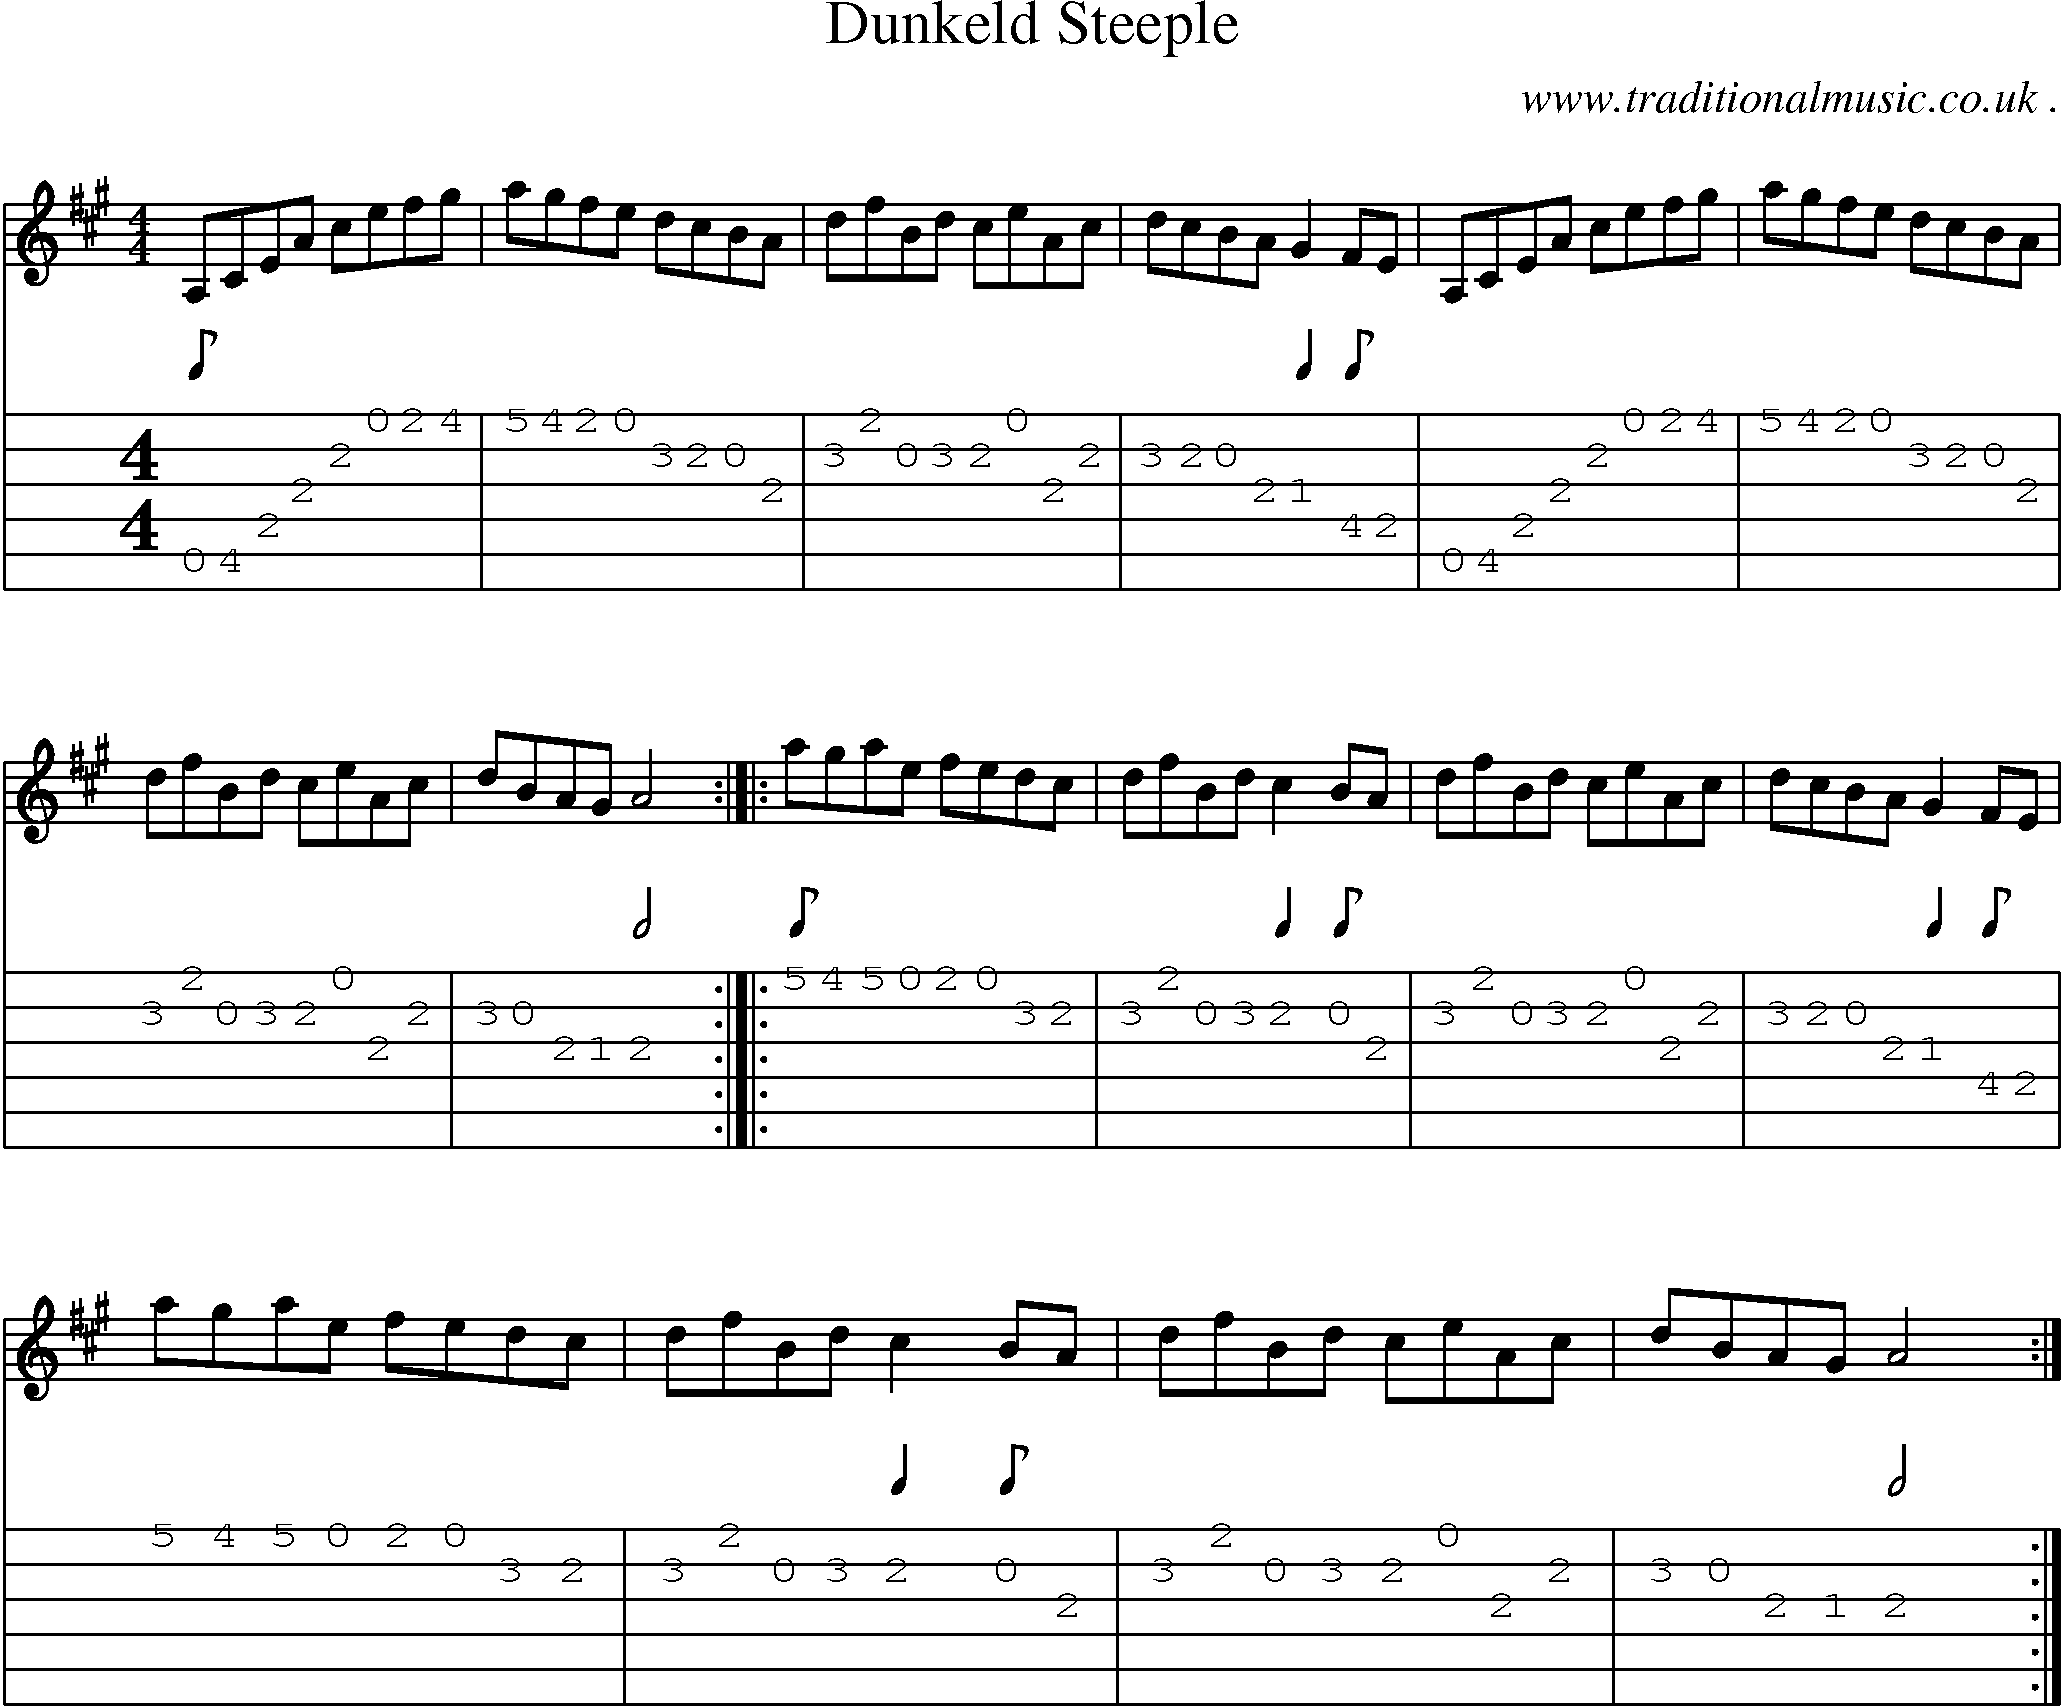 Sheet-music  score, Chords and Guitar Tabs for Dunkeld Steeple